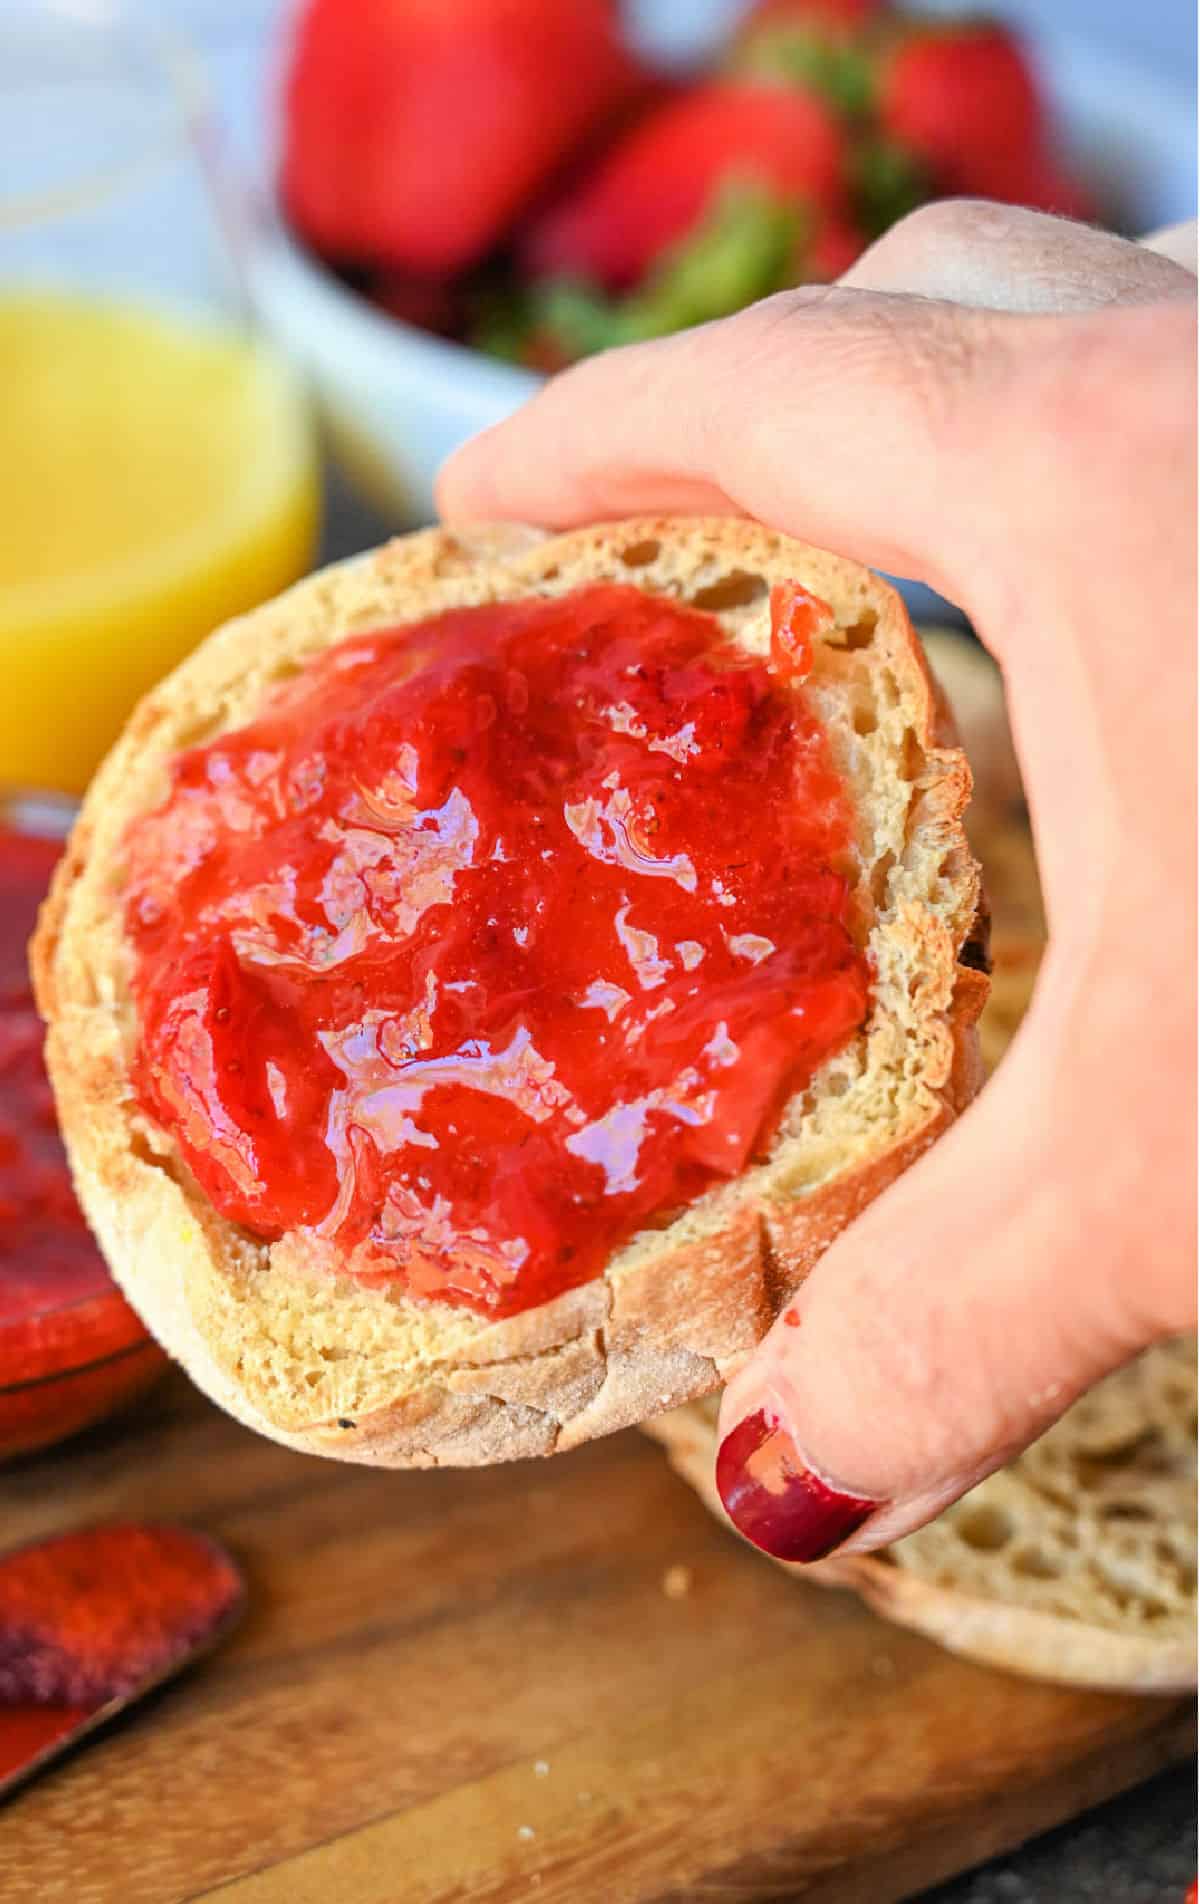 Holding an english muffin with strawberry jam.